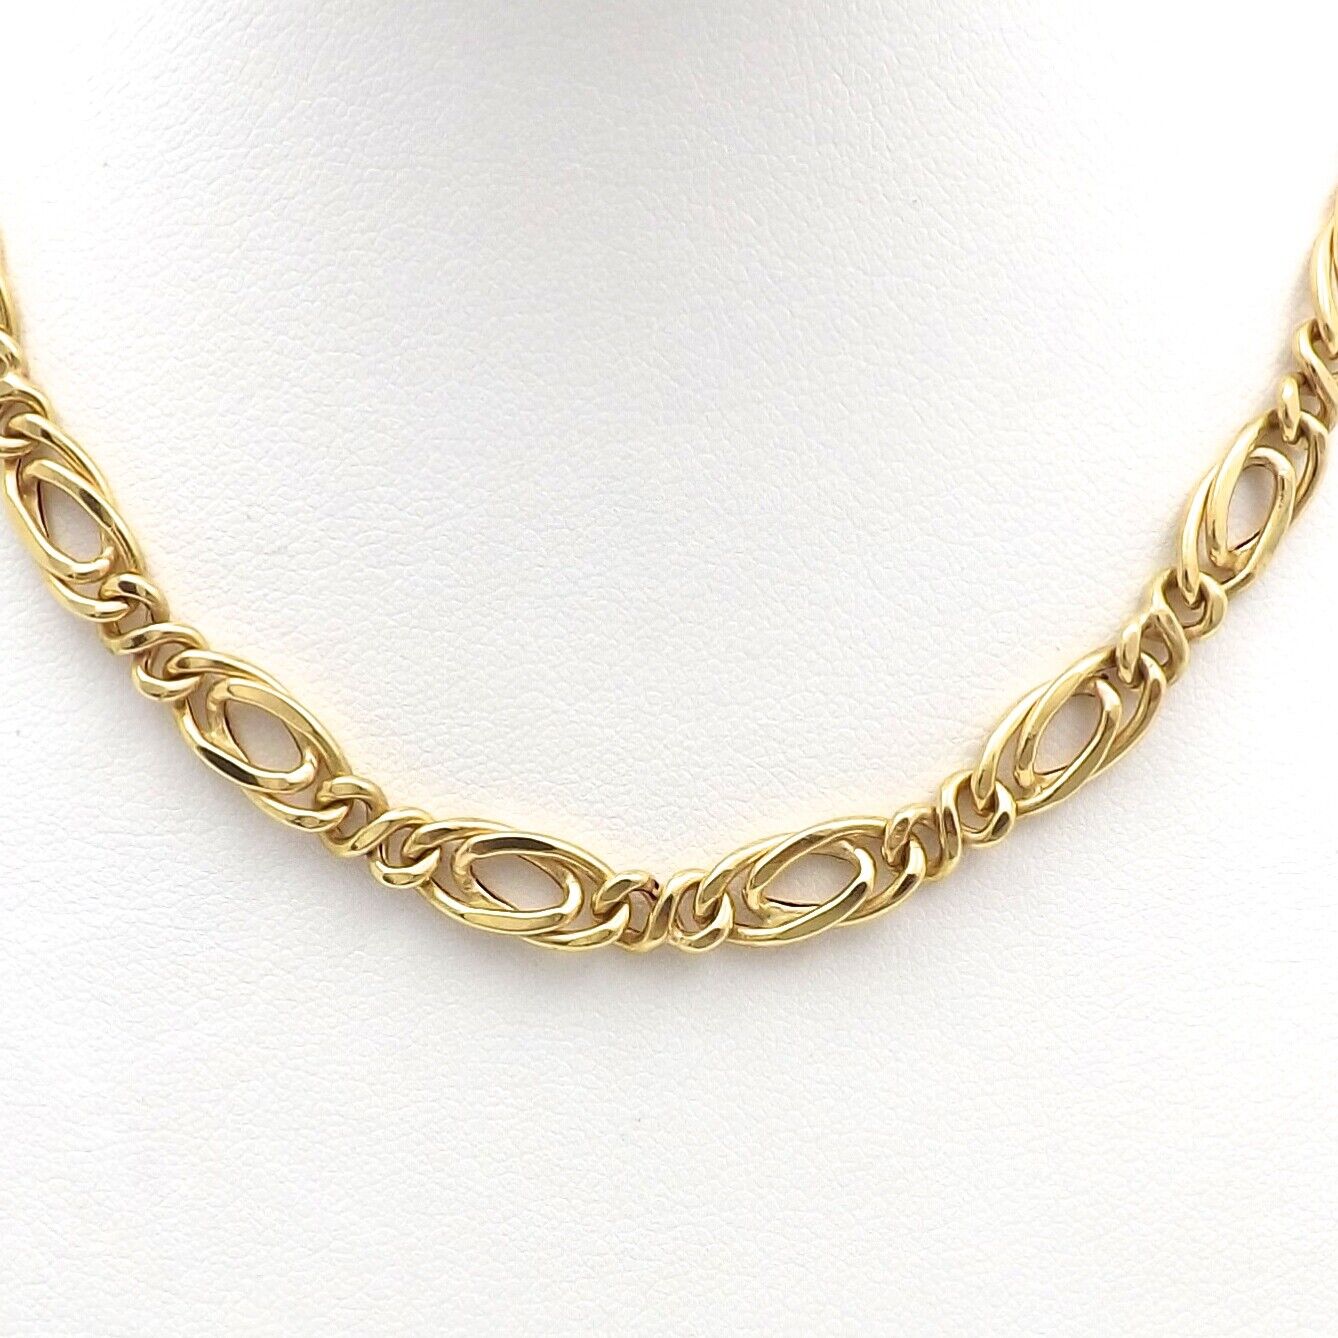 New 18k Gold 750 Italy Oval Tiger Eye Curb Infinity Link Chain Necklace  18in 15g